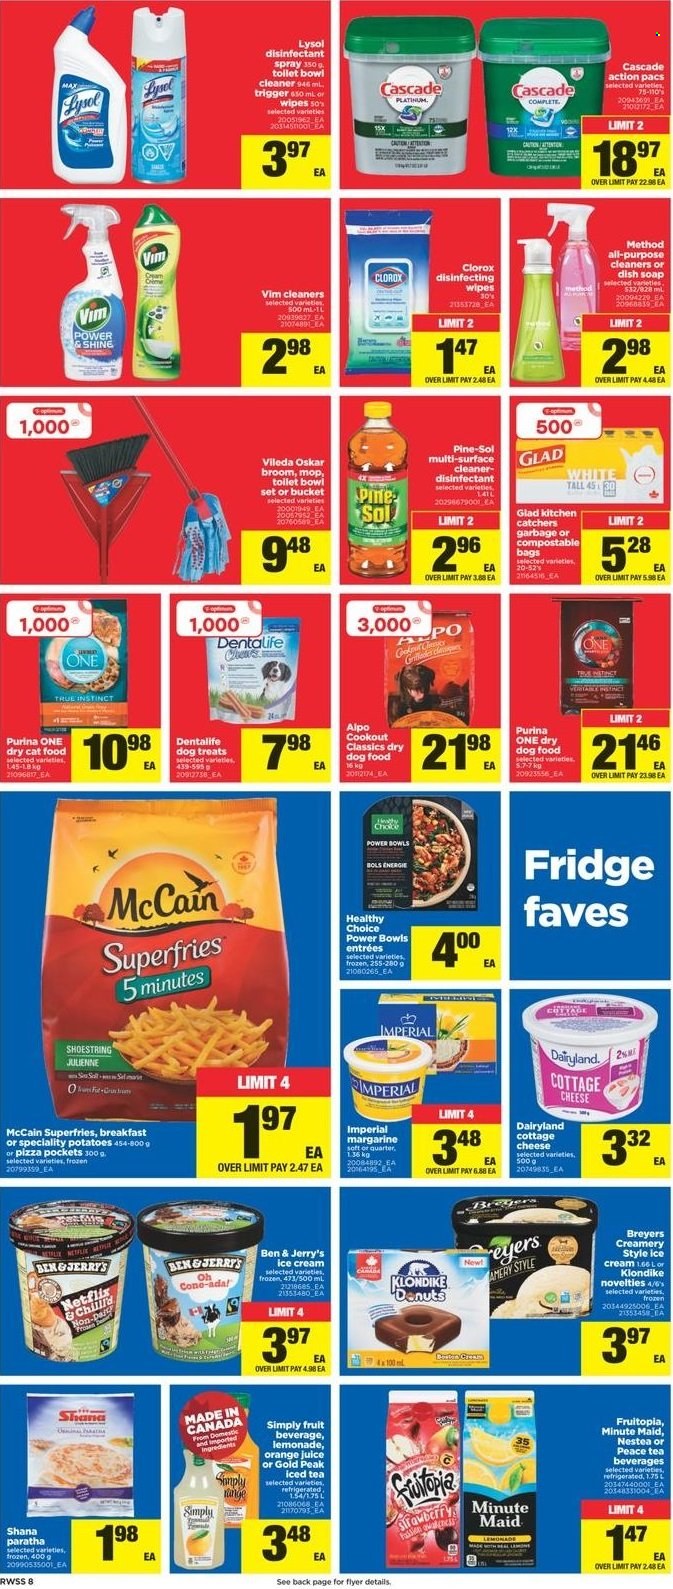 thumbnail - Real Canadian Superstore Flyer - October 22, 2021 - October 28, 2021 - Sales products - potatoes, pizza, Healthy Choice, cottage cheese, margarine, ice cream, Ben & Jerry's, McCain, potato fries, lemonade, orange juice, juice, ice tea, fruit punch, wipes, surface cleaner, cleaner, Lysol, Clorox, Pine-Sol, Cascade, soap, antibacterial spray, Vileda, mop, broom, bowl set, animal food, cat food, dog food, Purina, Dentalife, dry dog food, dry cat food, Alpo, desinfection. Page 8.